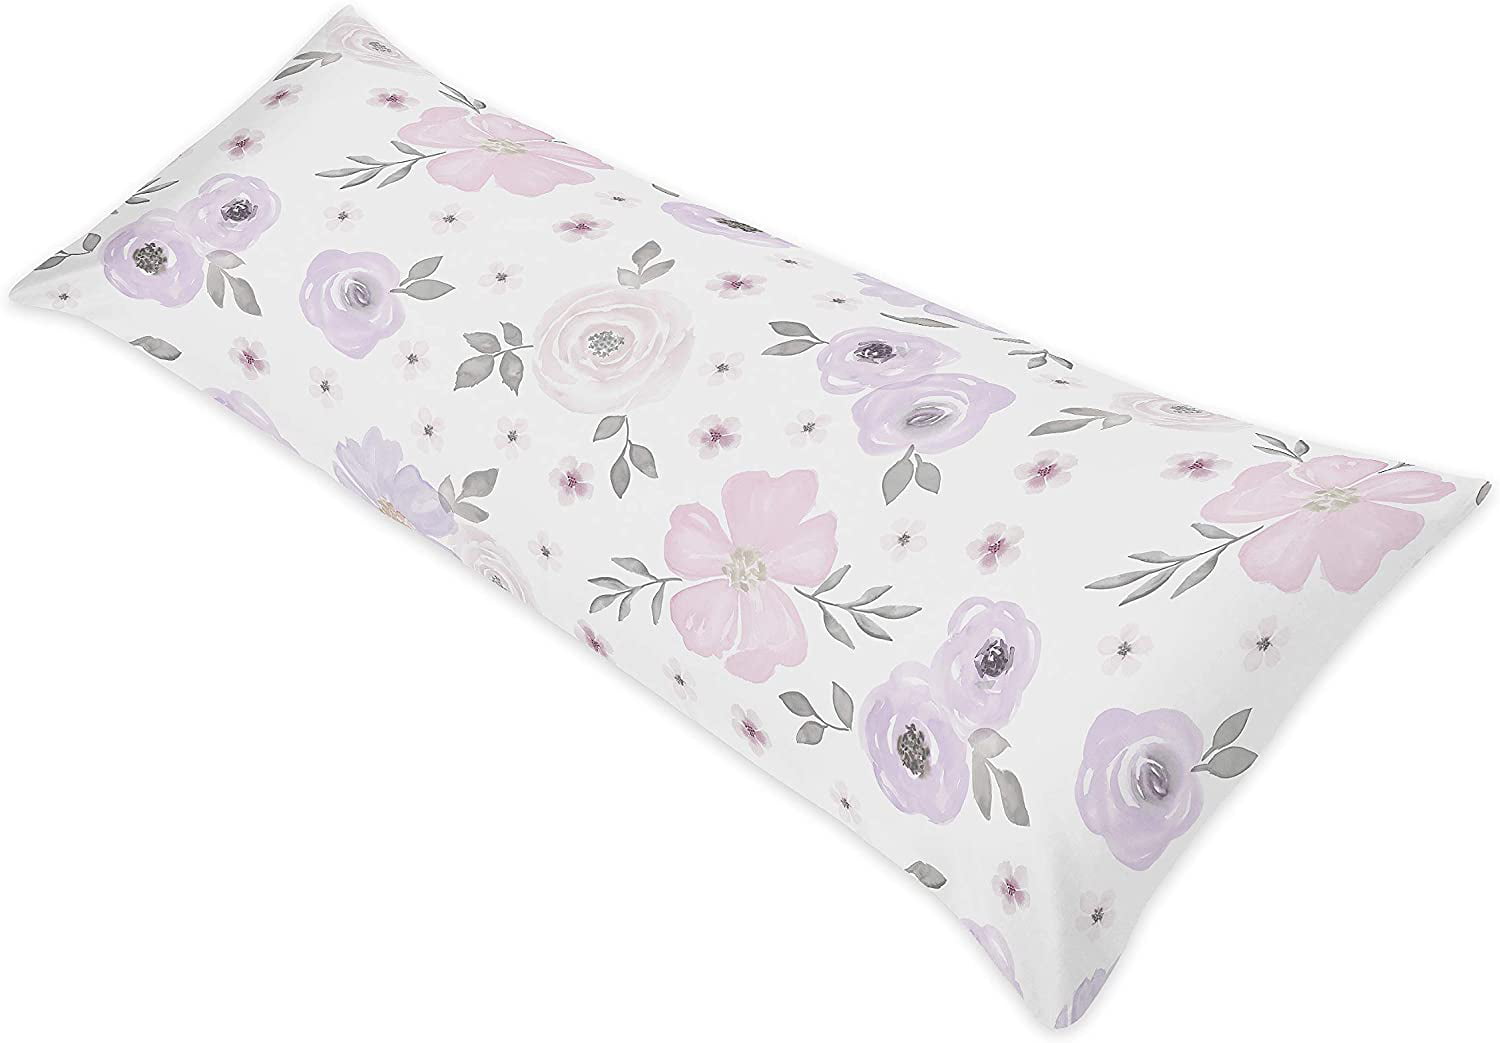 Polka Dot Lavender Purple Pink Grey Watercolor Floral Body Pillow Case Cover